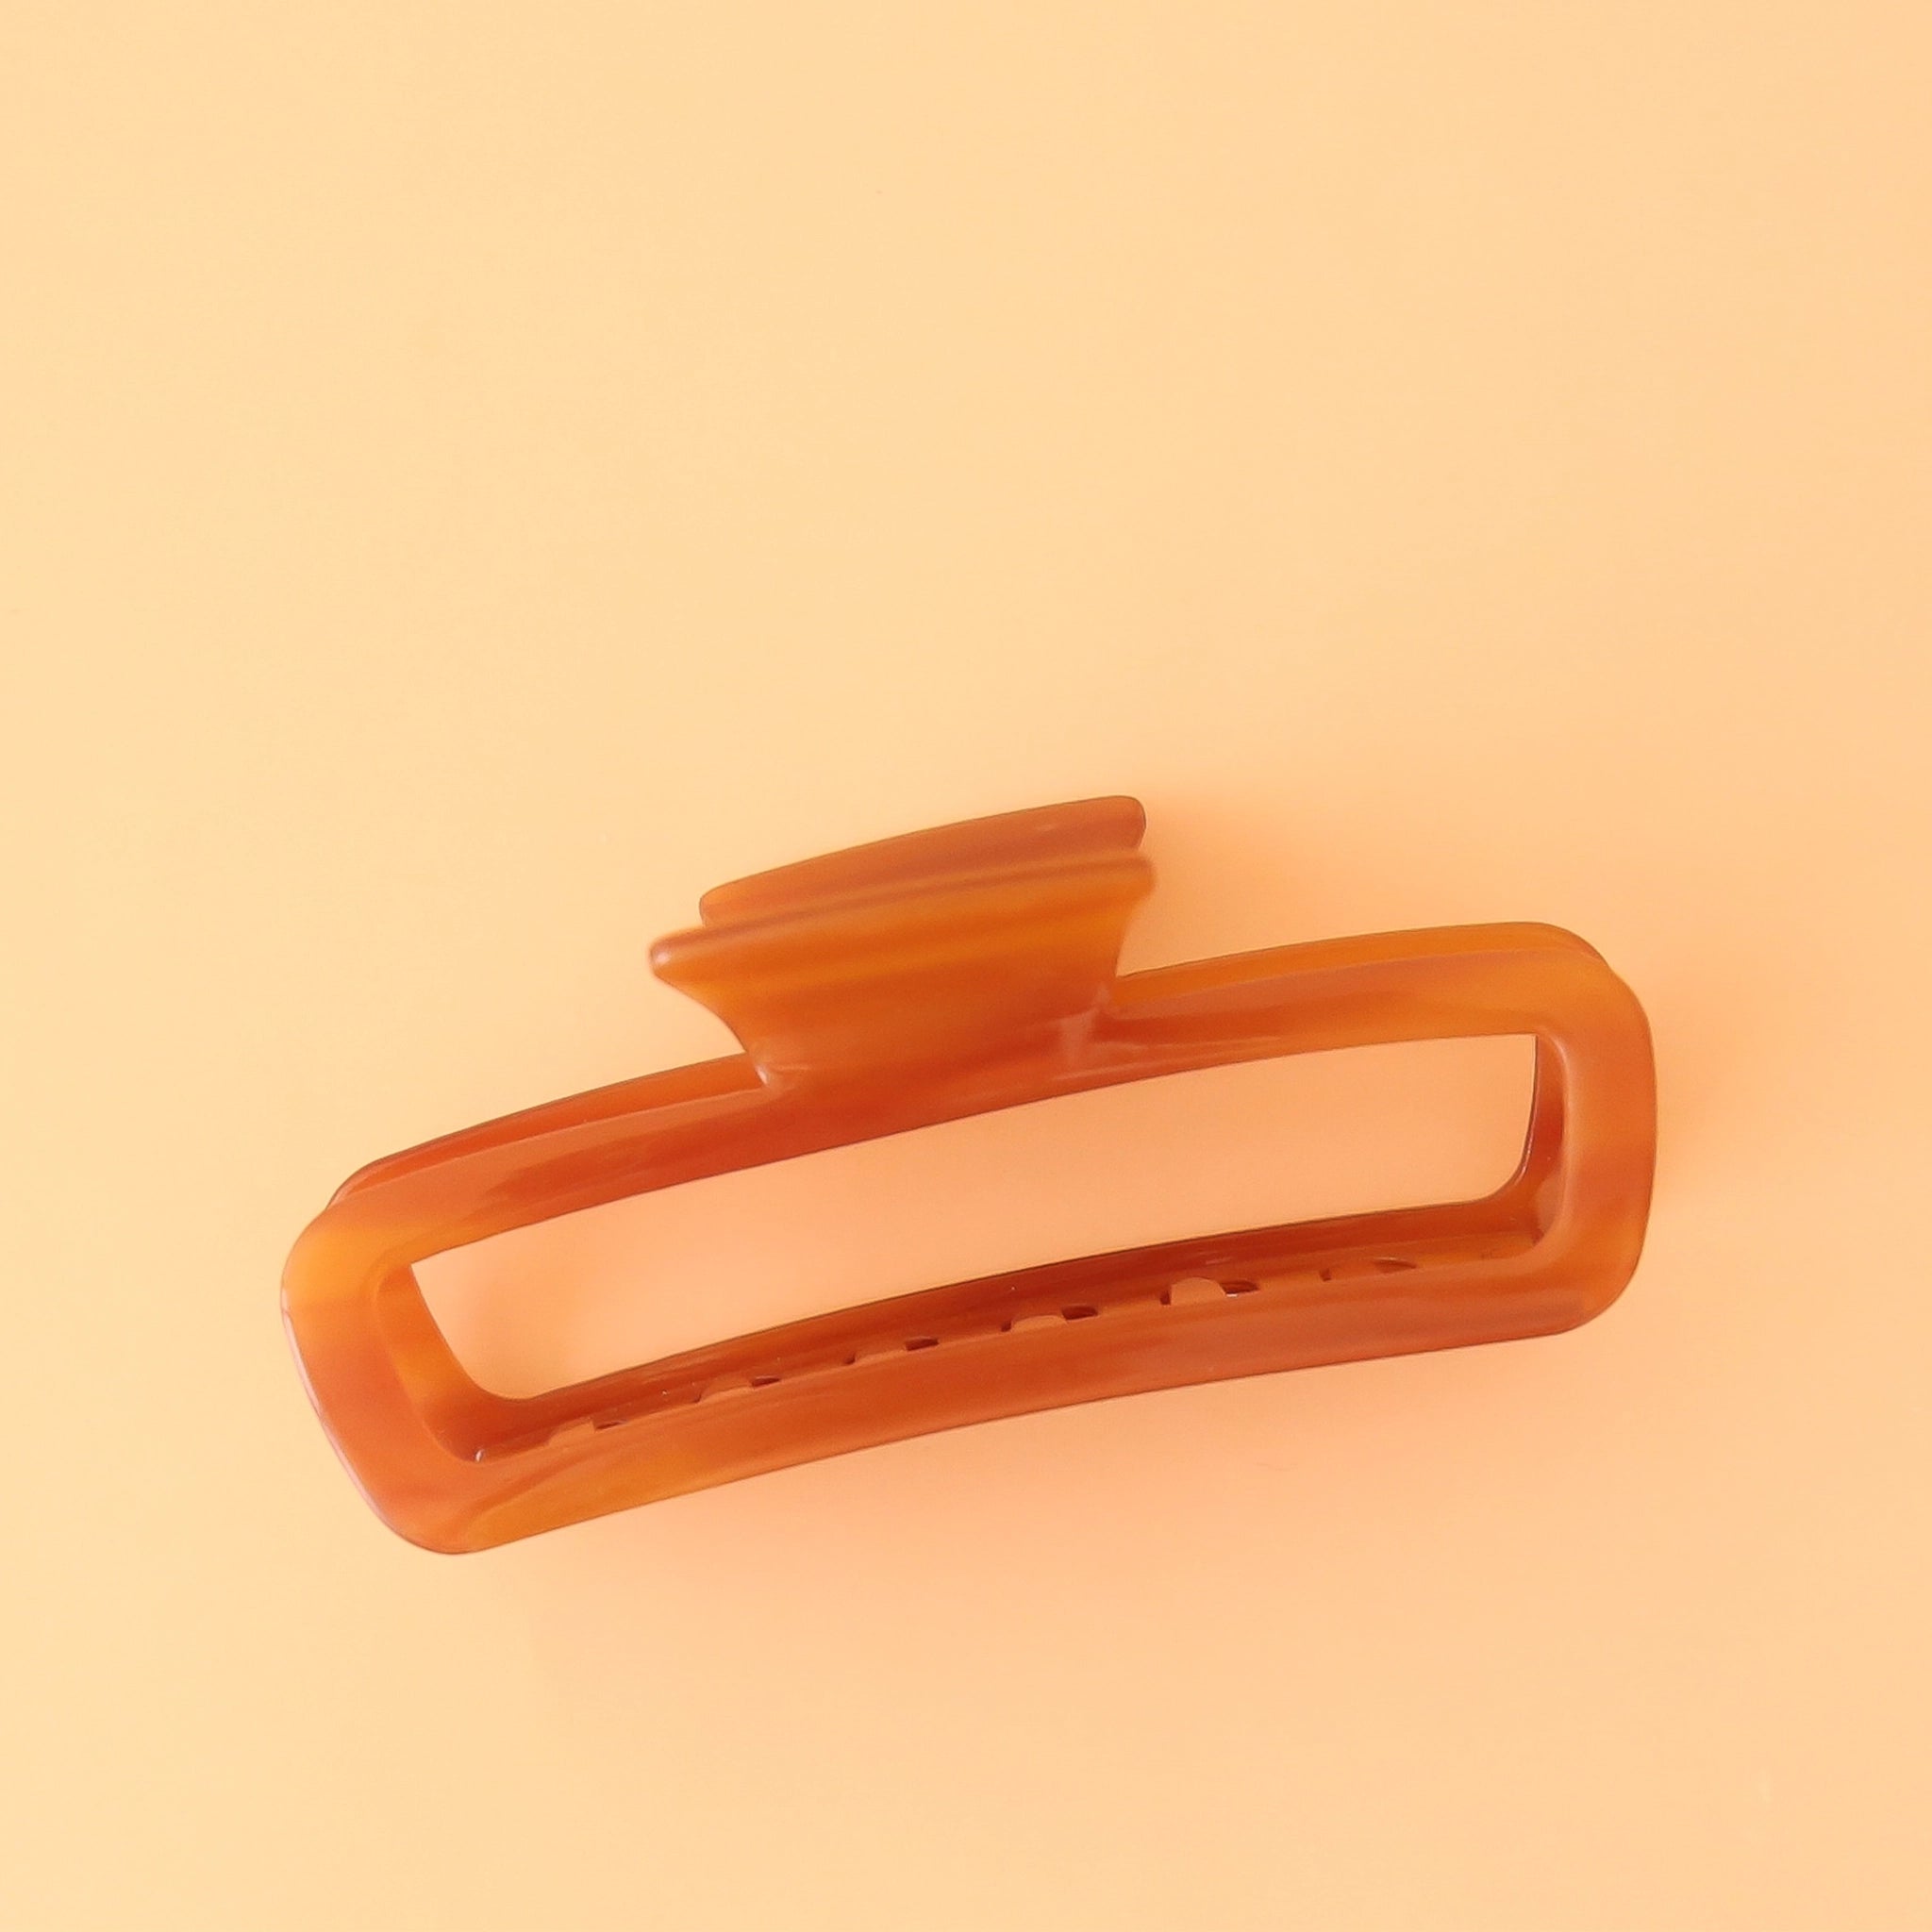 On a peachy background is an amber colored rectangle claw clip with slightly rounded edges.